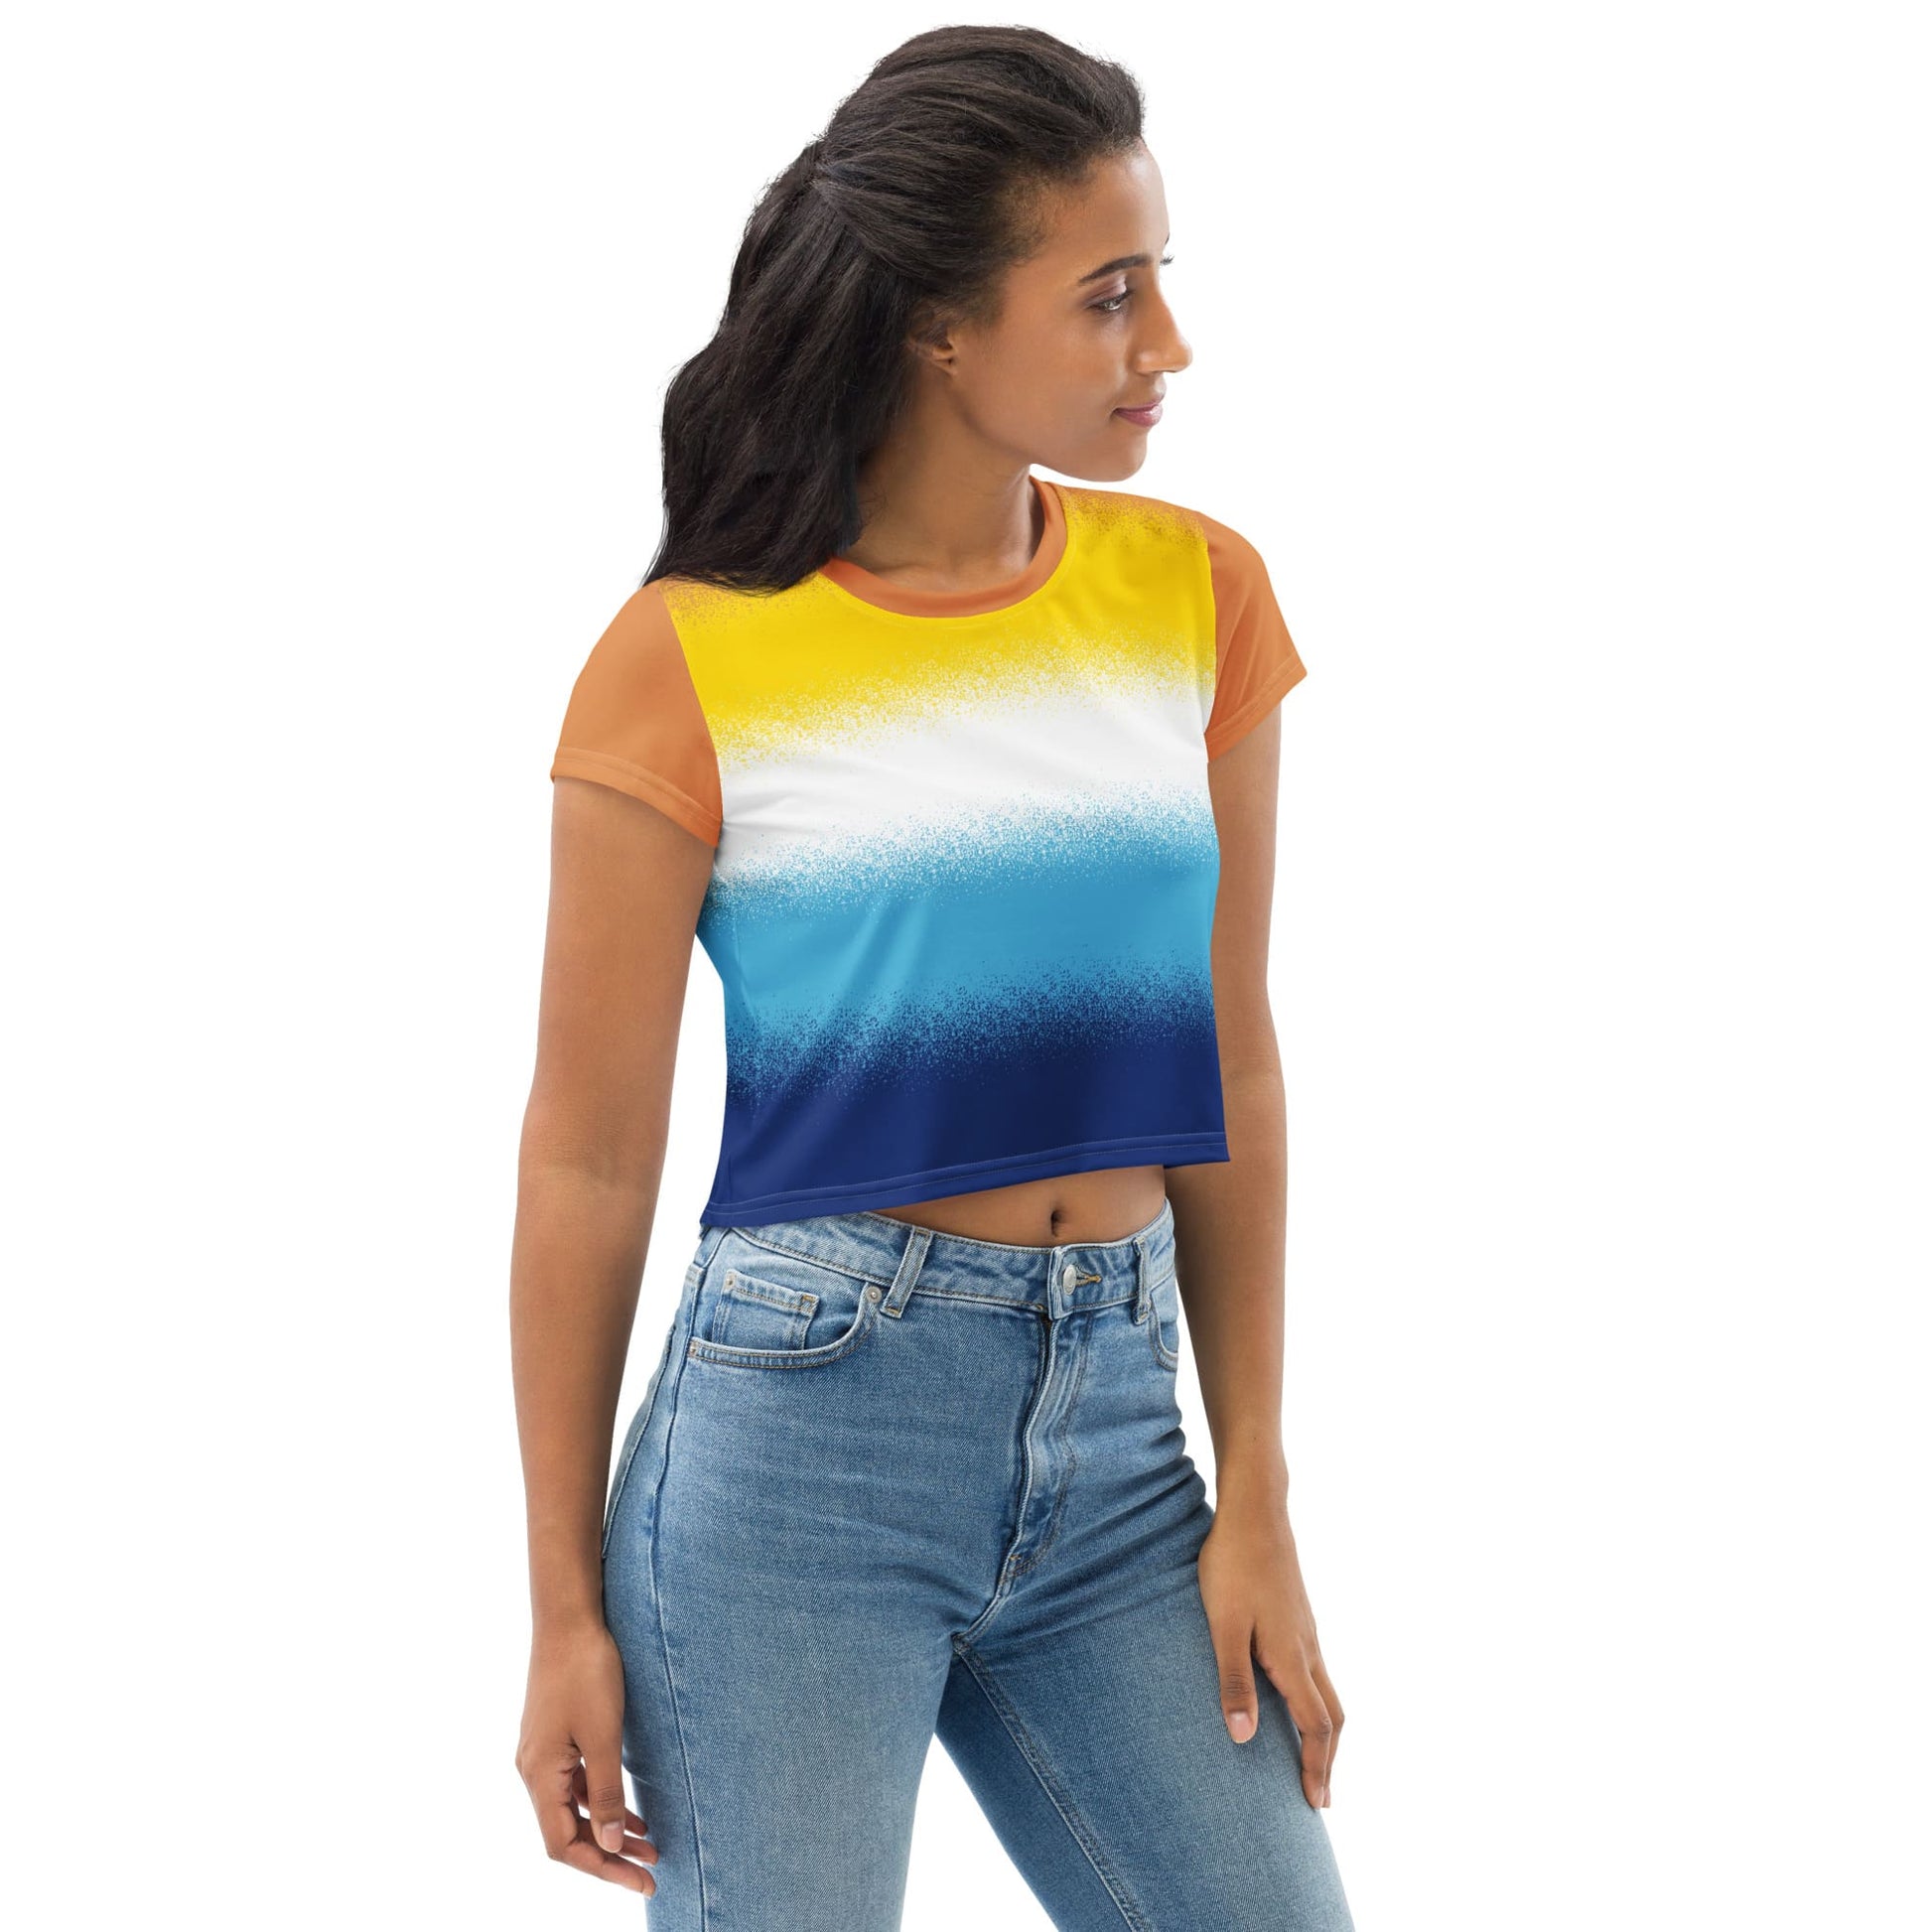 aroace crop top, aro ace pride cropped shirt with wings on back, right